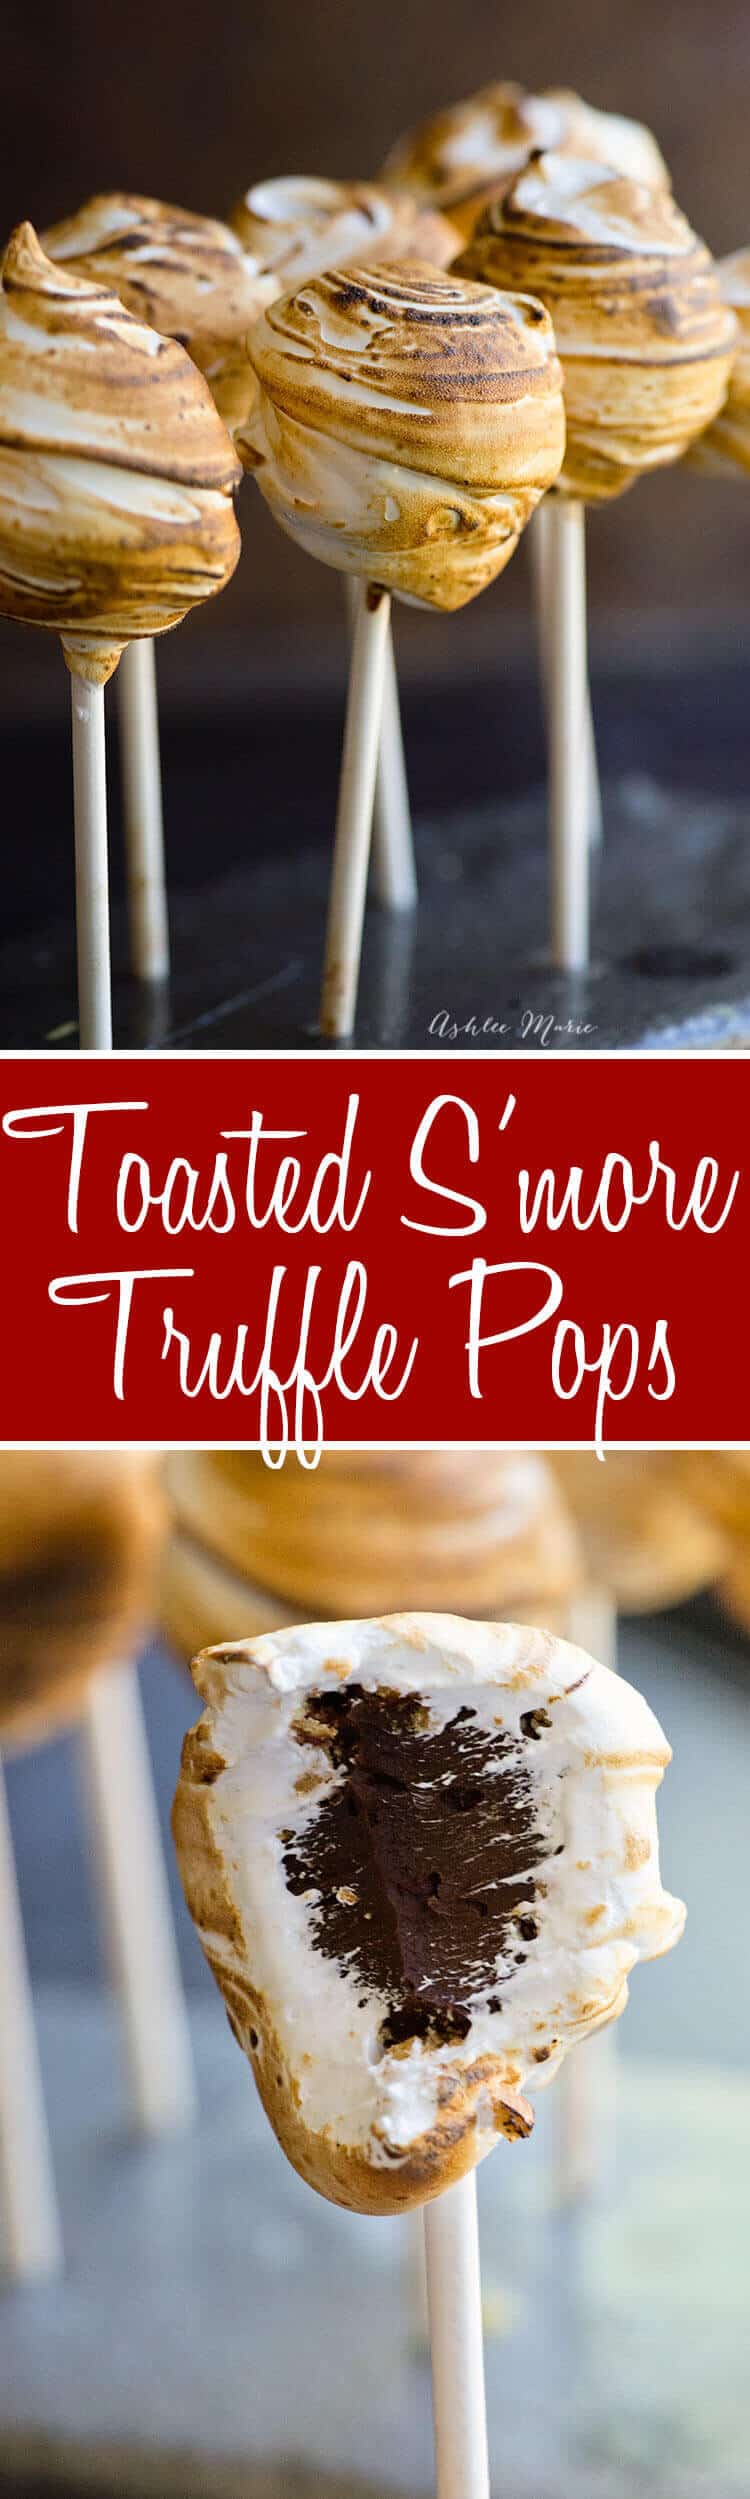 perfect for a S'more without a fire - a rich truffle center and a soft gooey toasted marshmallow exterior, a treat everyone will love!